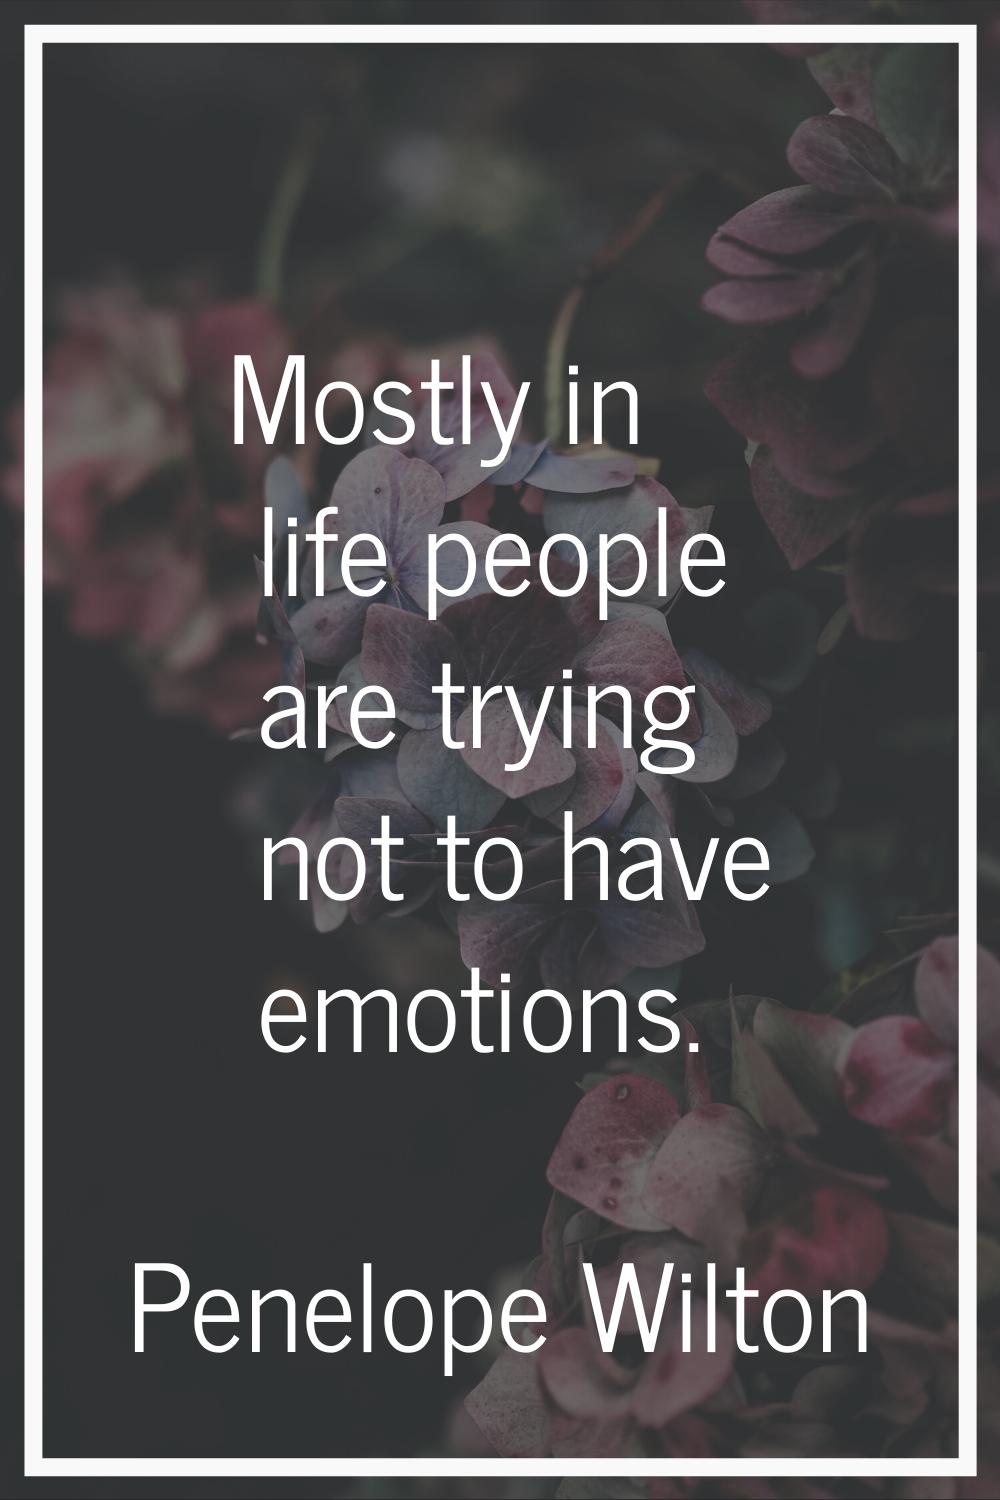 Mostly in life people are trying not to have emotions.